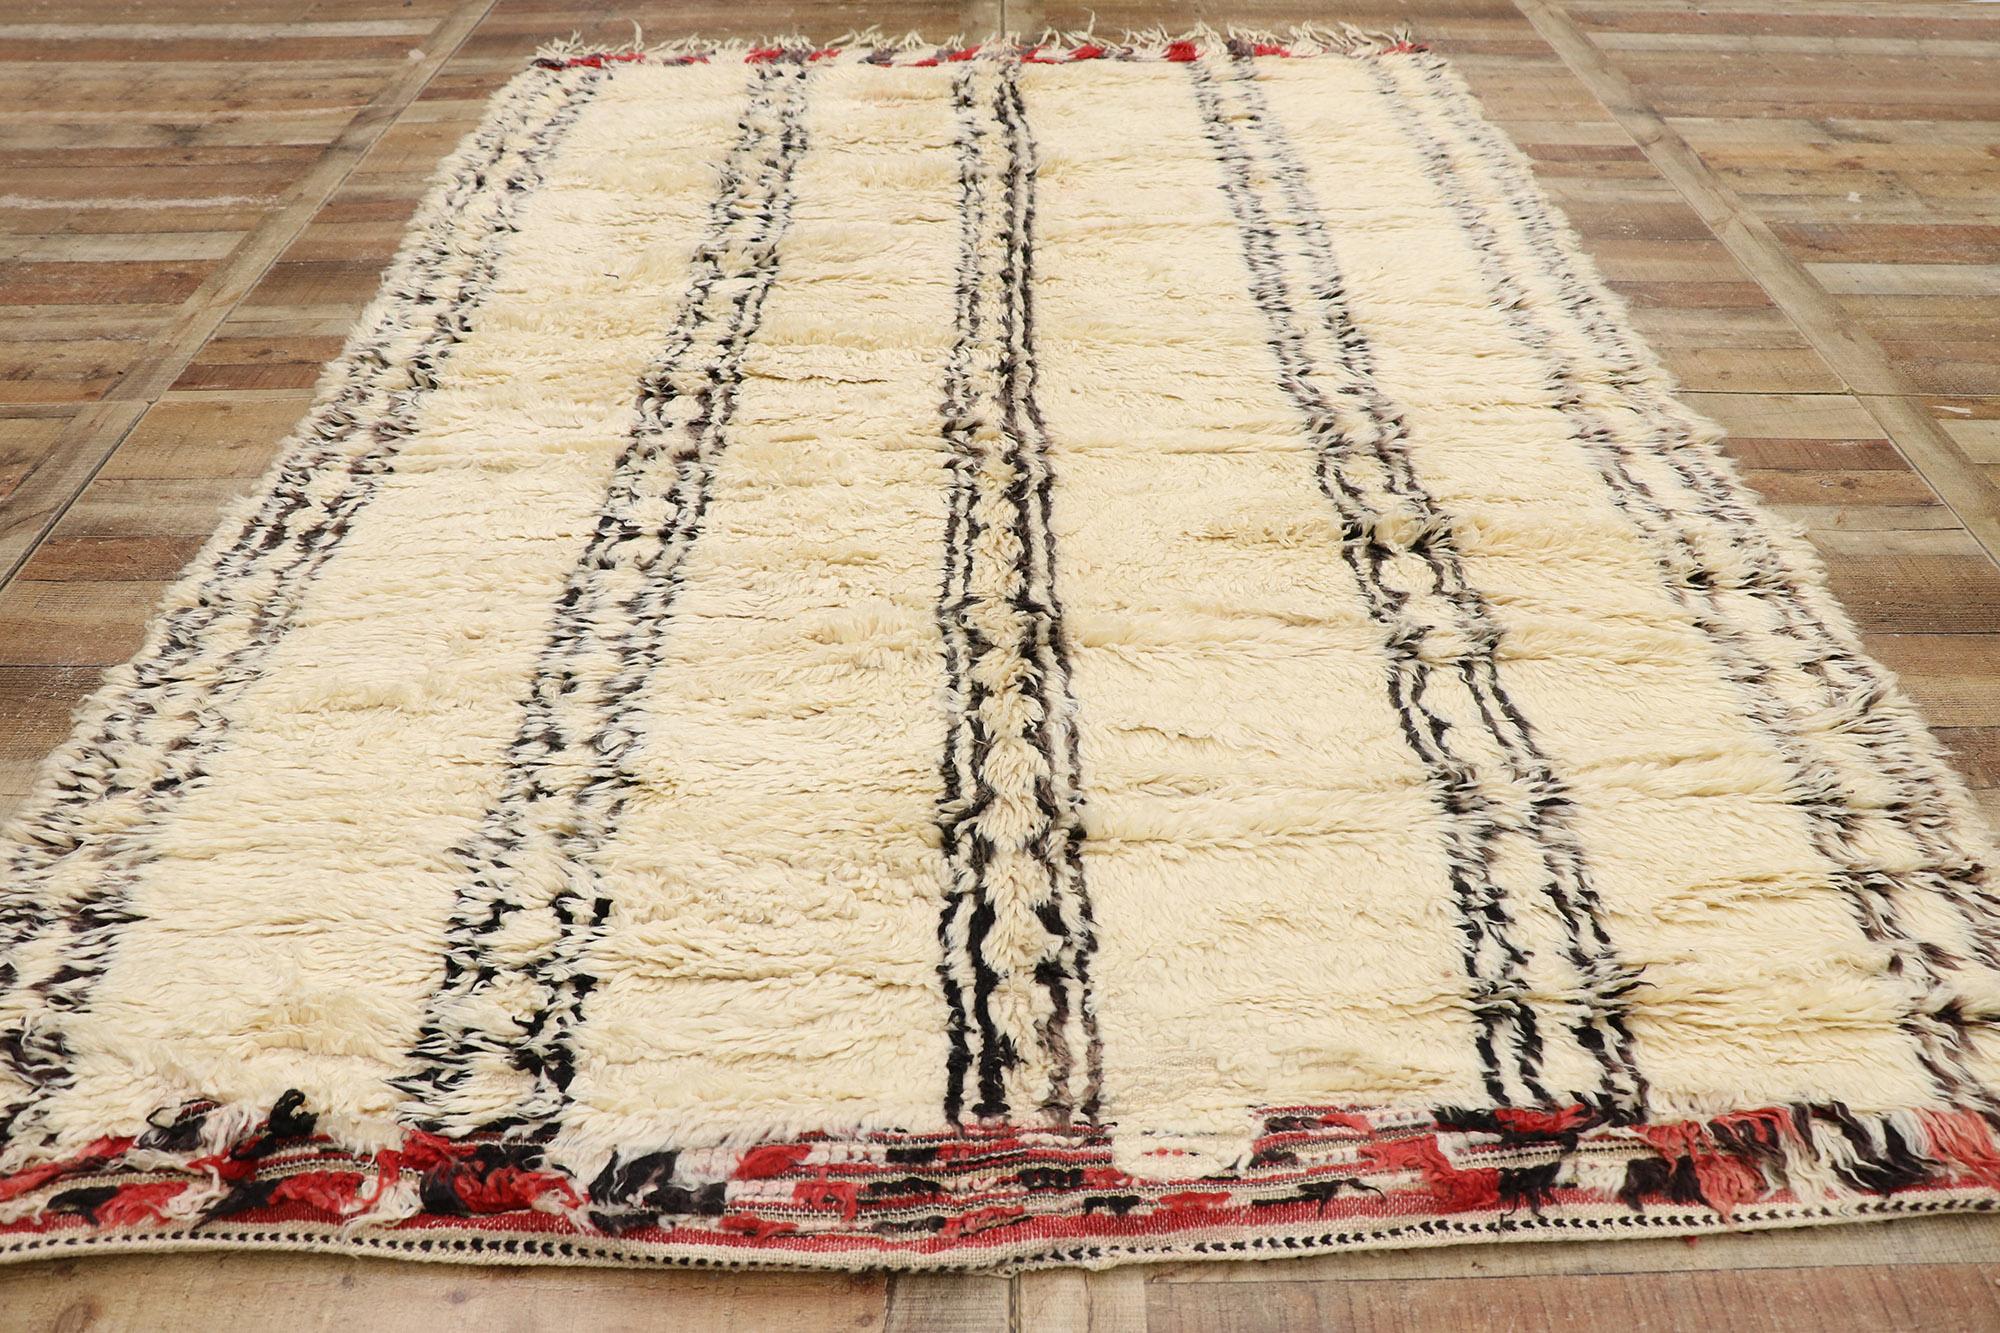 Vintage Berber Beni Ourain Moroccan Rug with Mid-Century Modern Style 1